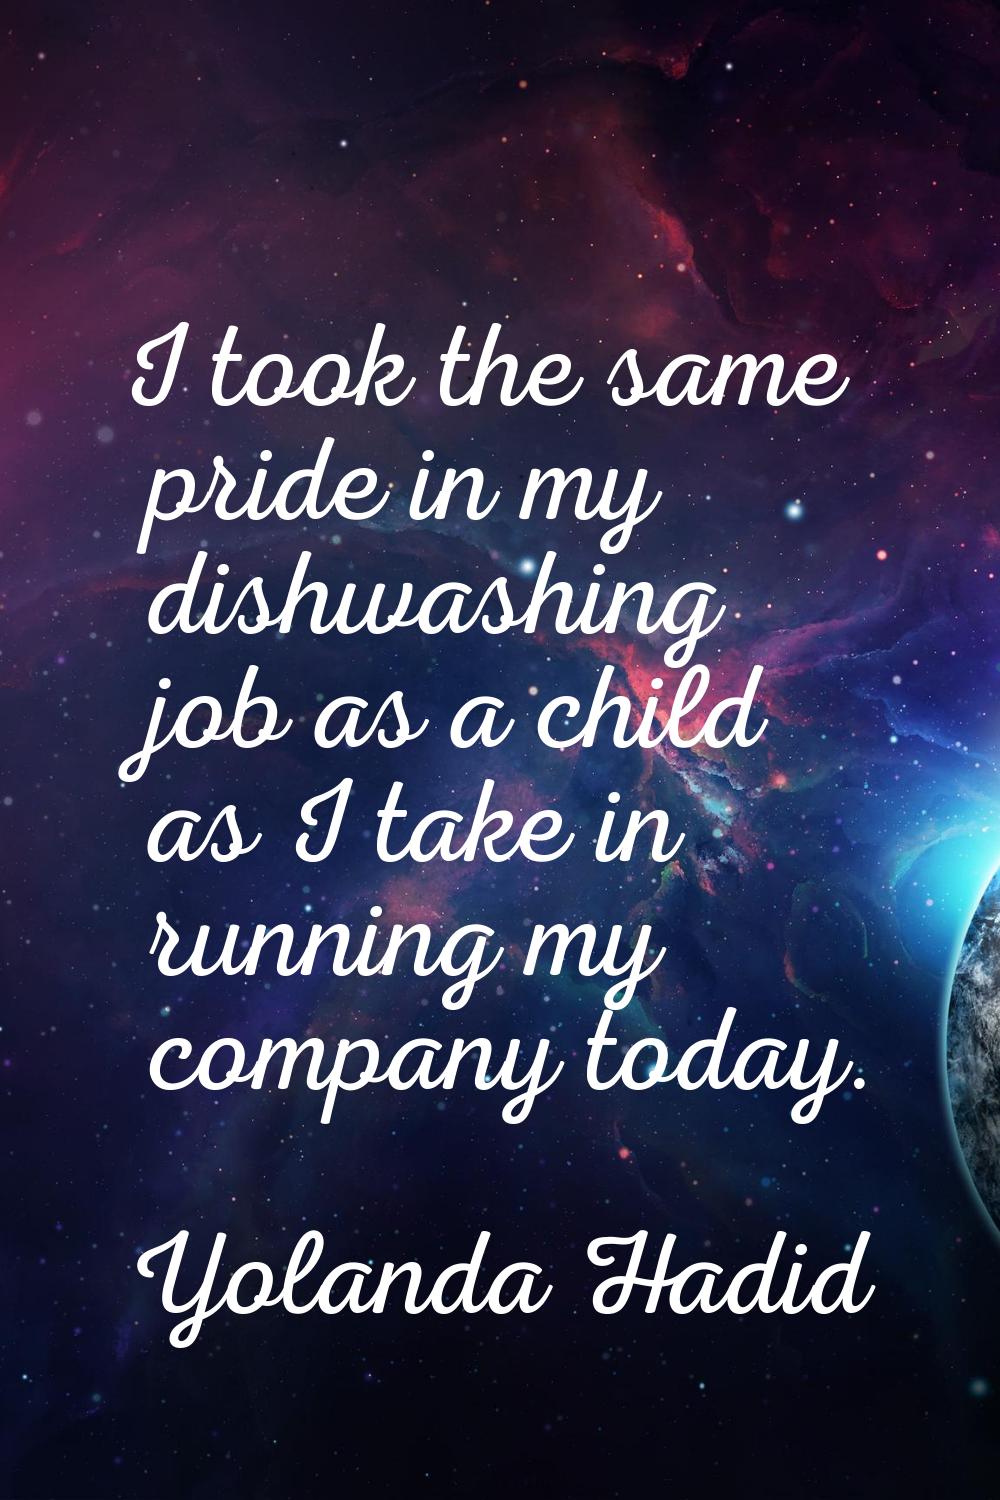 I took the same pride in my dishwashing job as a child as I take in running my company today.